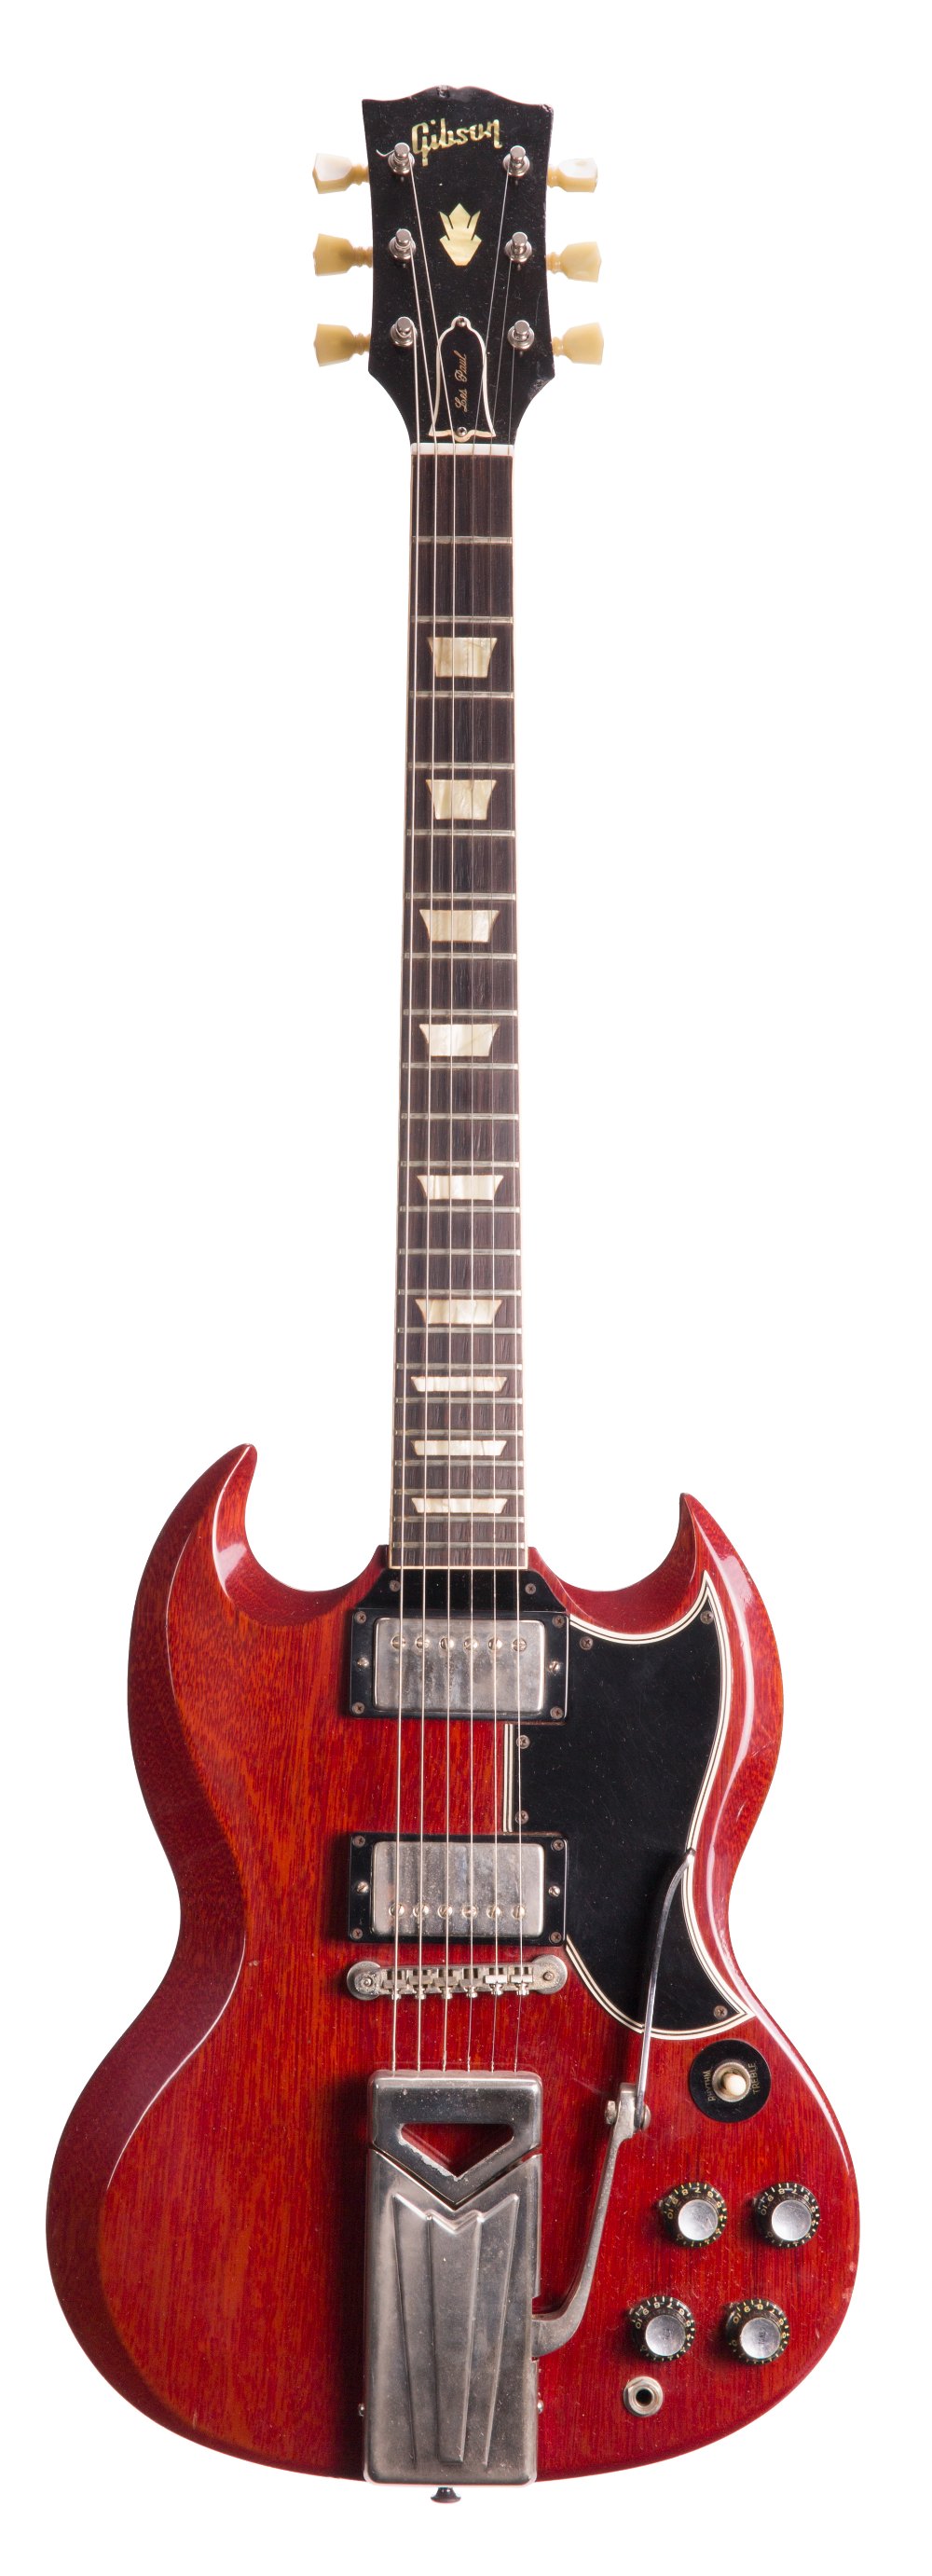 1961 Gibson Les Paul Standard electric guitar, made in USA, ser. no. 6xx1; Finish: cherry, some